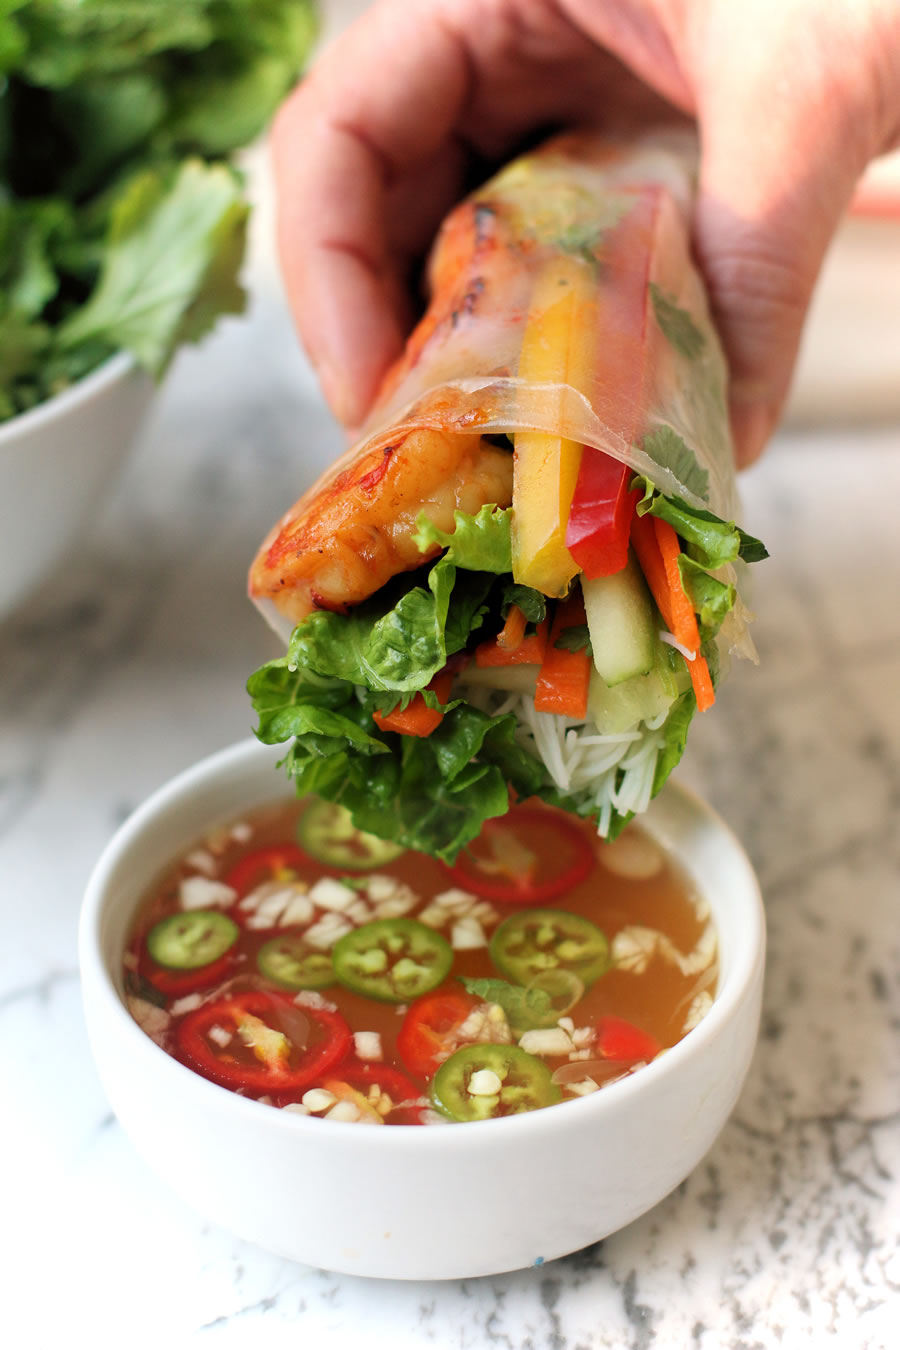 dipping Vietnamese spring rolls in a sweet and spicy sauce